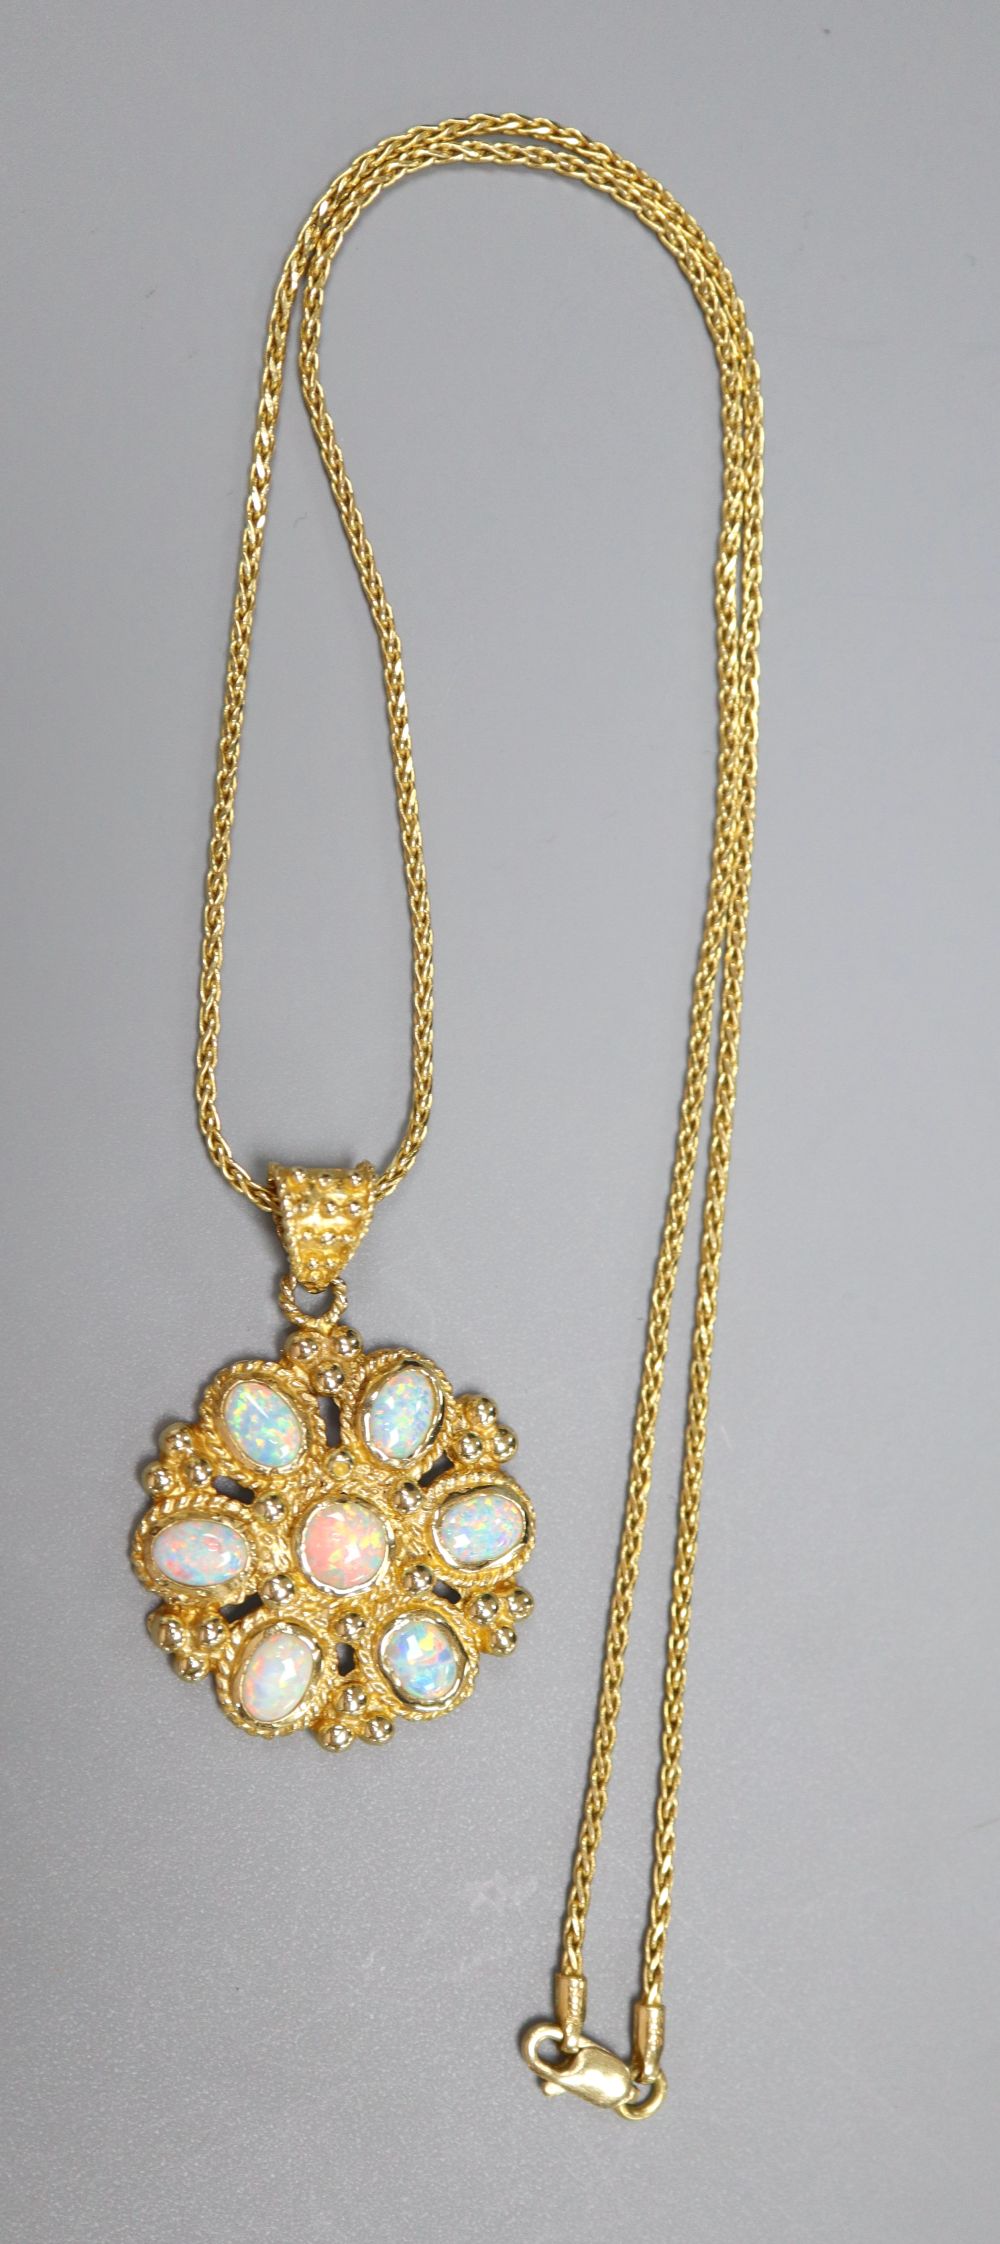 A Turkish 585 and white opal flowerhead pendant on chain by Istor, 13.4g